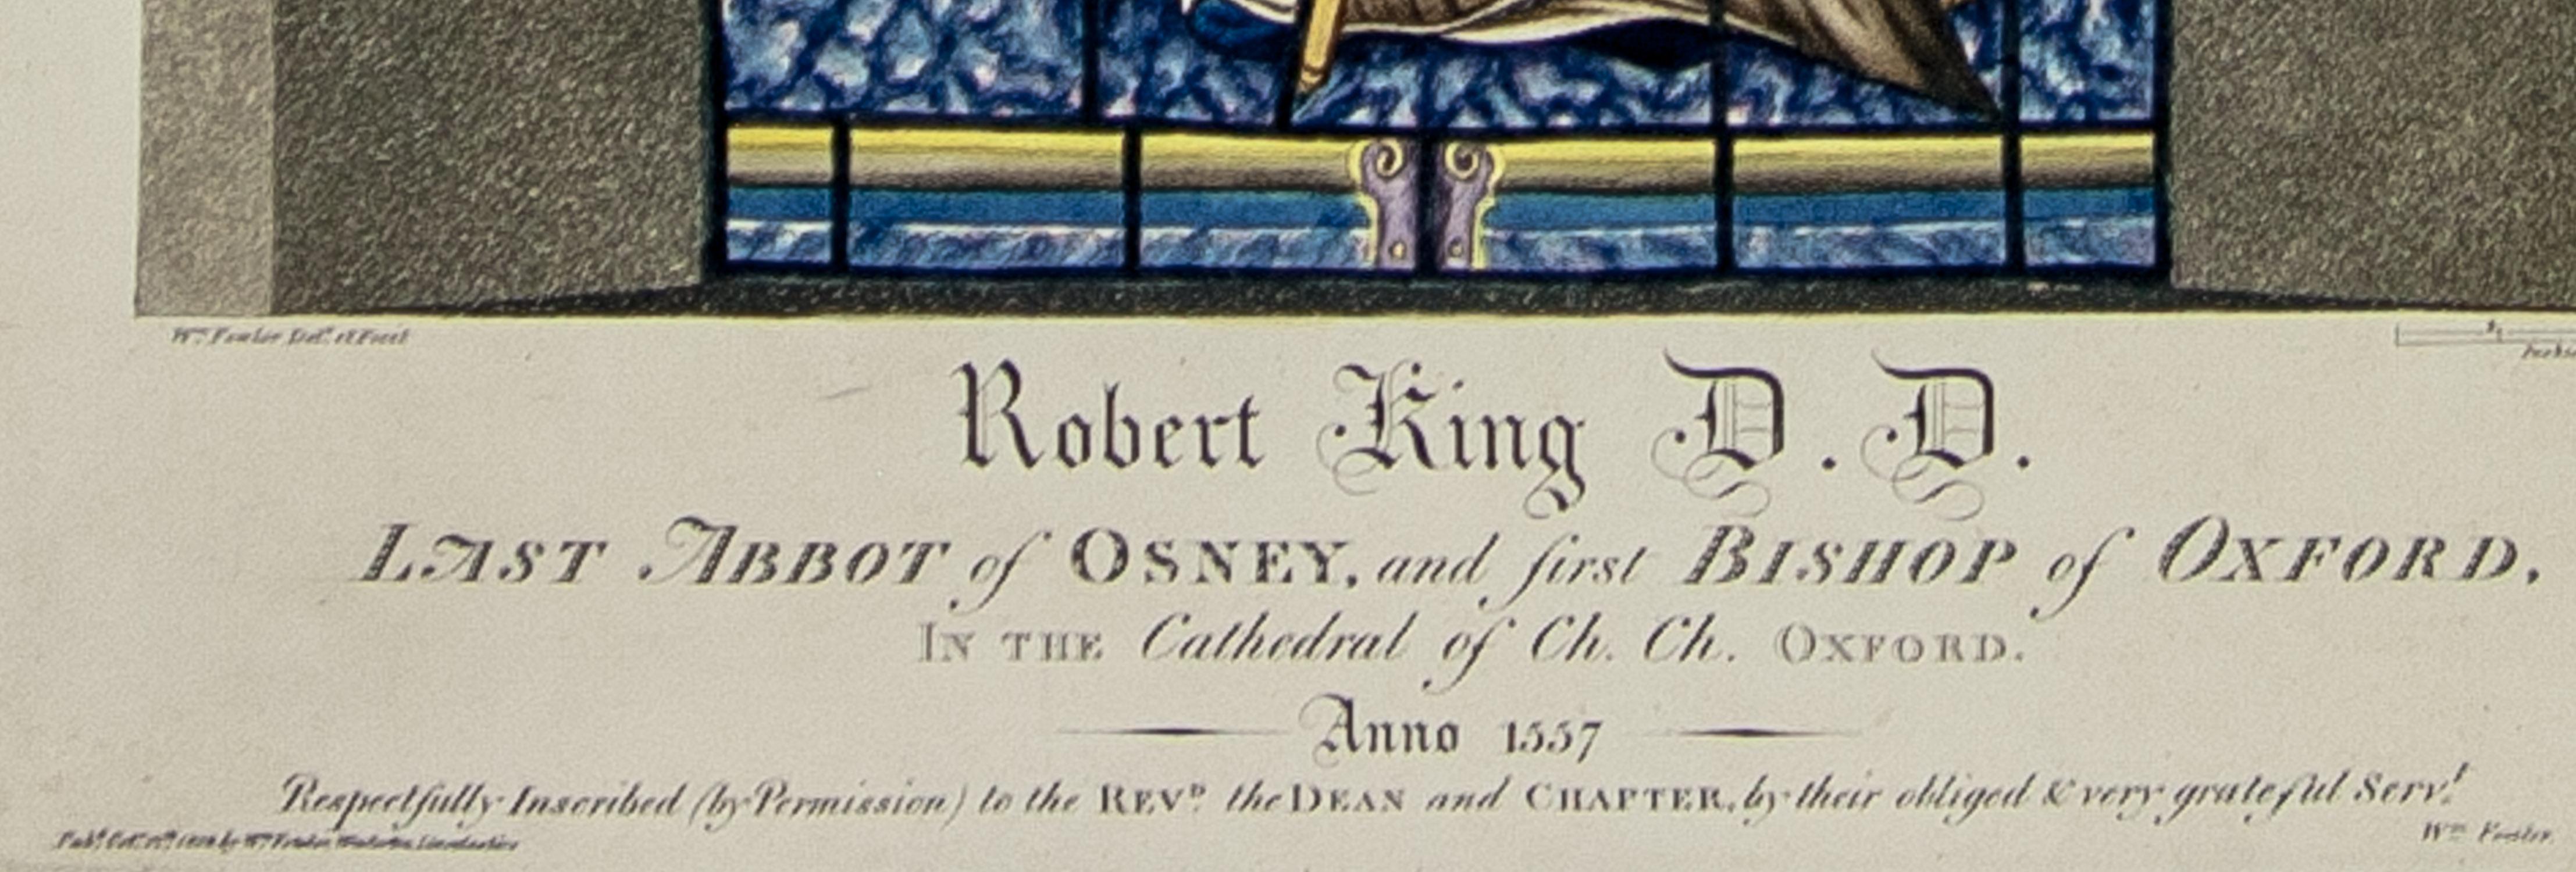 Original hand-coloured acquatint engraving of a stained glass window in Christ Church Cathedral, Oxford, depicting the Bishop Robert King D. D. the last Abbot of Osney and the first Bishop of Oxford, shown here in front of the Oxford Cathedral. With